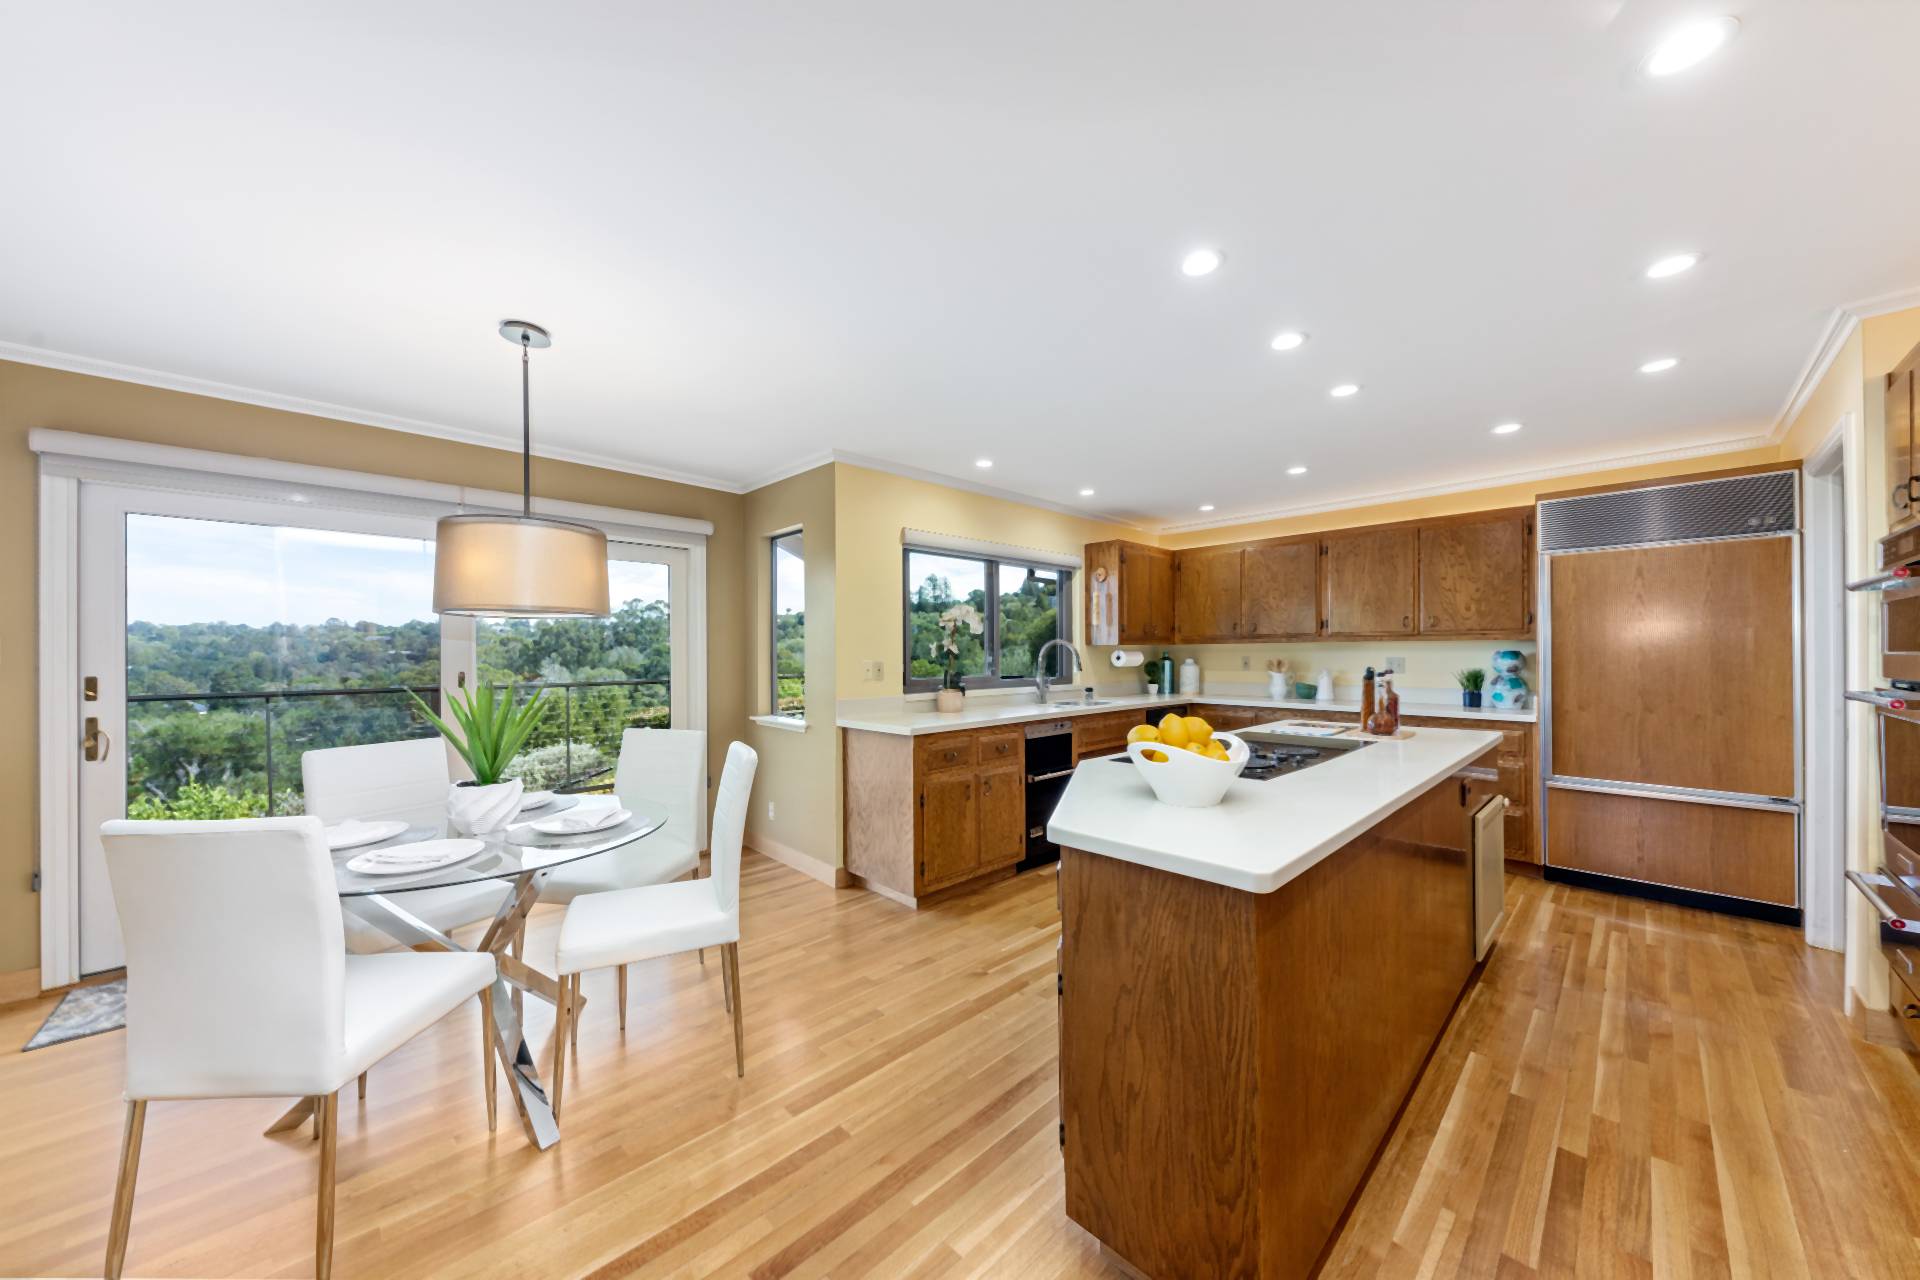 San Francisco, CA – Tips on Choosing a Local Complete Real Estate Staging Company